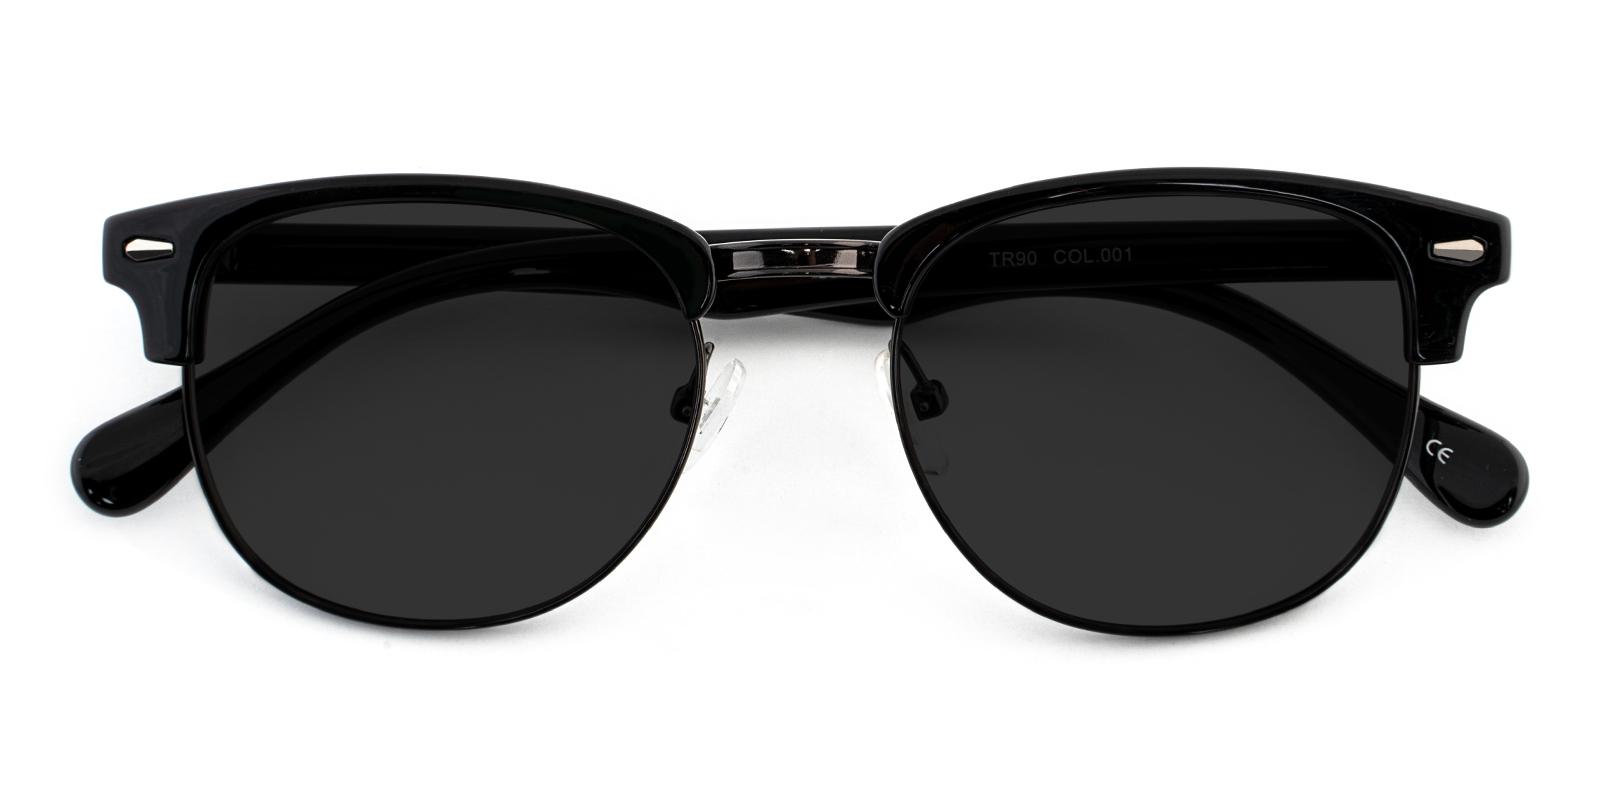 Michel Black Combination NosePads , Sunglasses Frames from ABBE Glasses